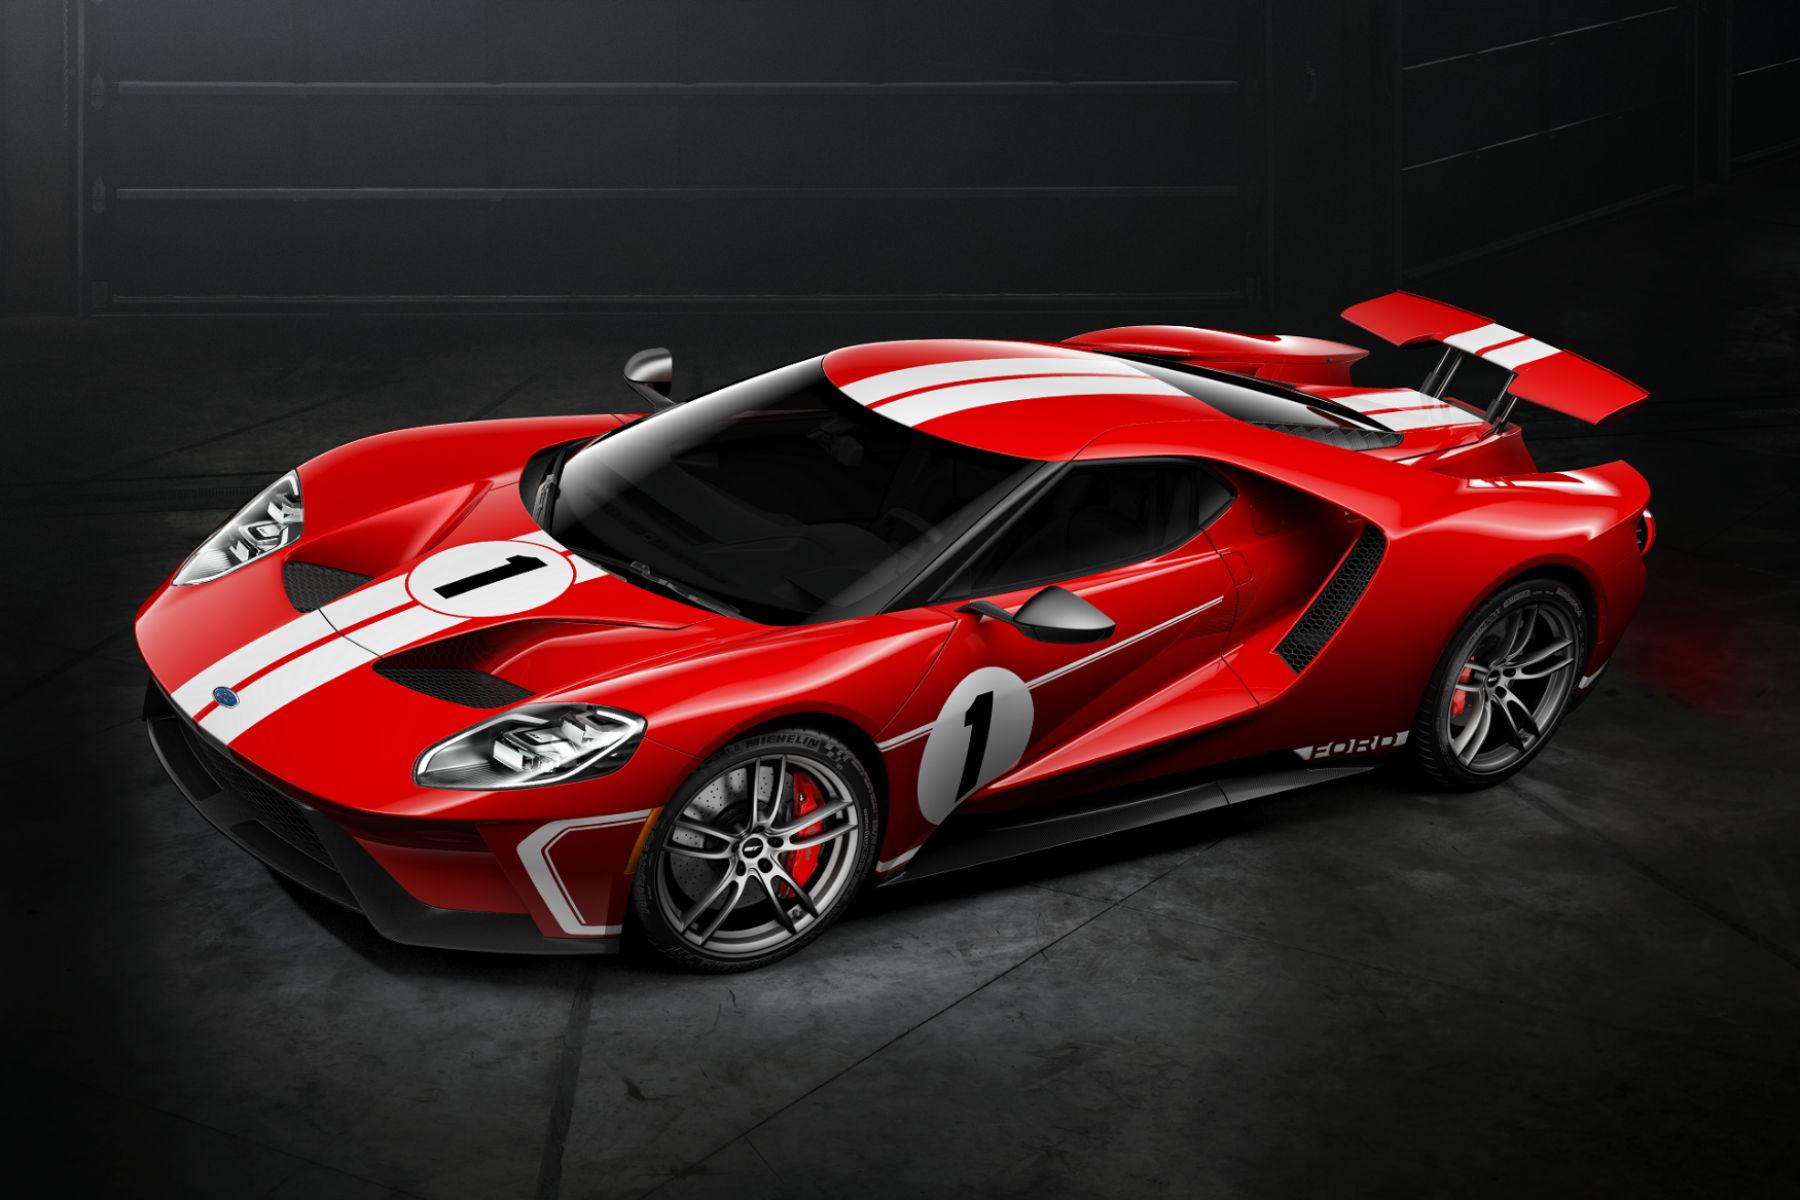 Ford GT '67 Heritage Edition celebrates Le Mans win